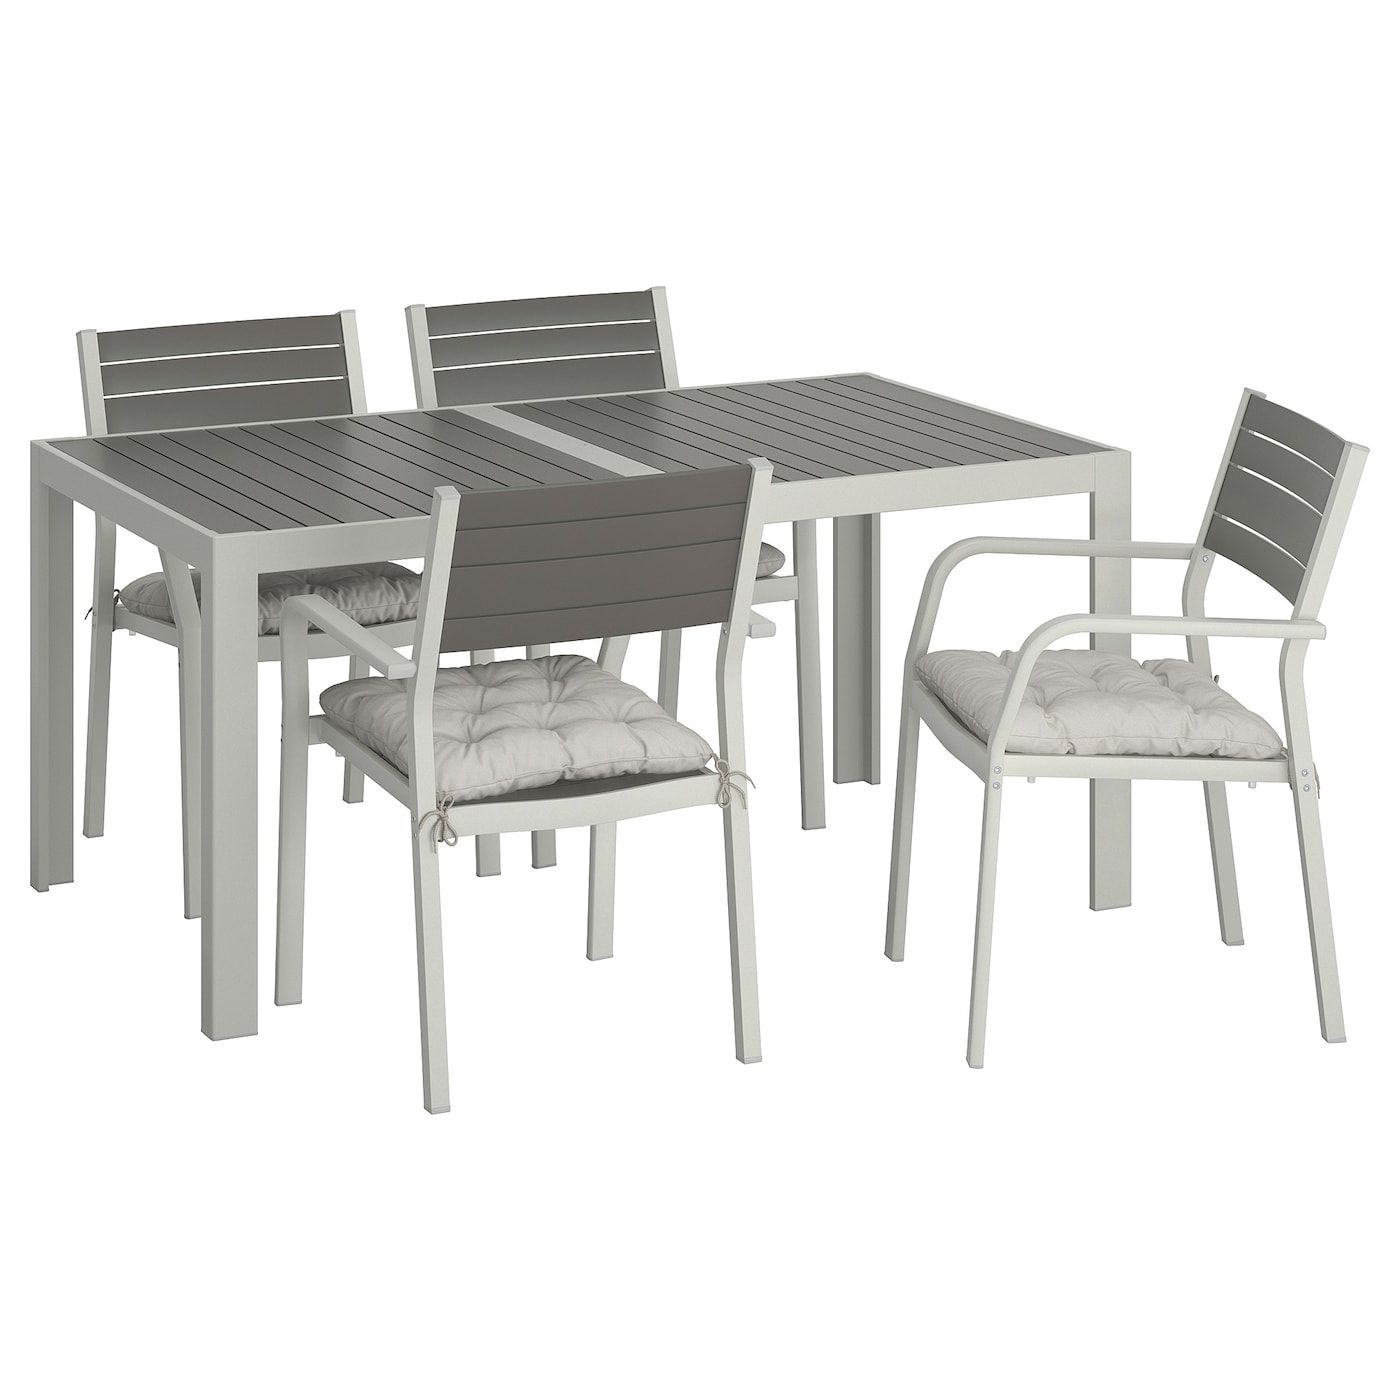 Table+4 Chairs W Armrests, Outdoor Själland Dark Grey, Kuddarna Grey In Most Popular Black Wash Banks Extending Dining Tables (View 16 of 25)